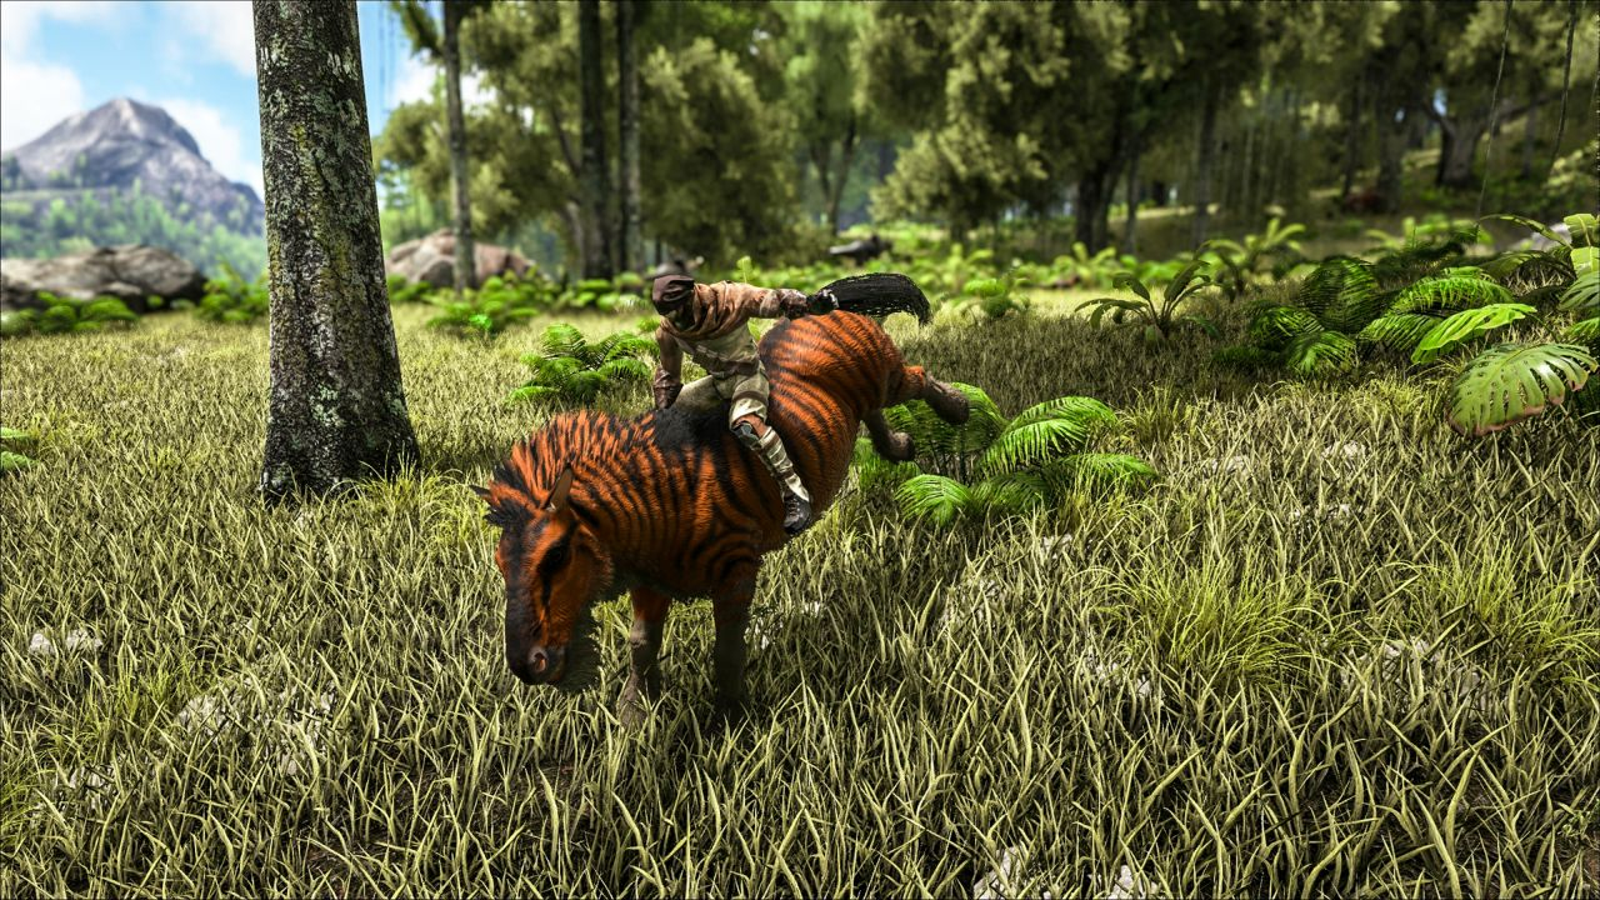 Latest Ark: Survival update you lasso critters while riding a horse looking for a unicorn | VG247